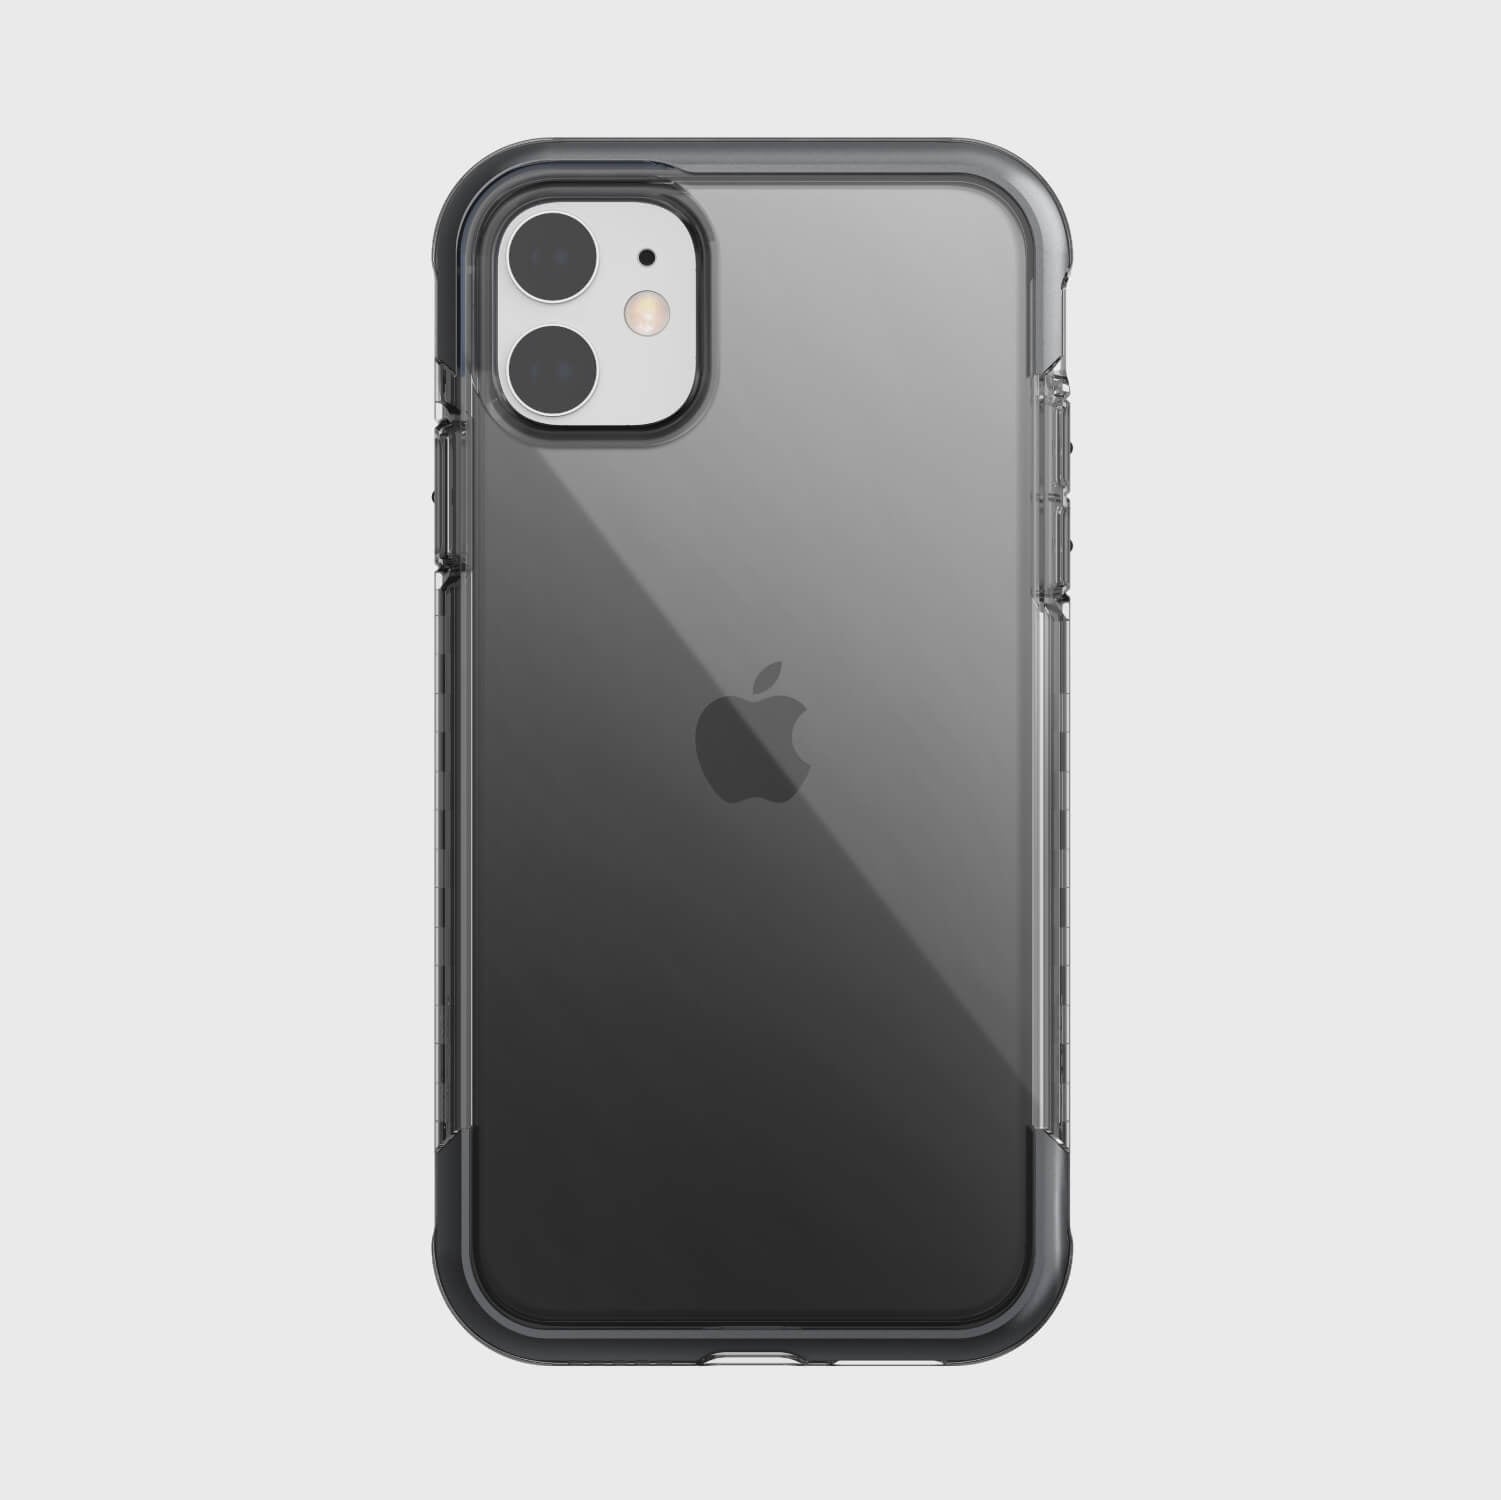 The wireless charging capability of the Raptic AIR iPhone 11 Case in black can be seen from the back view.